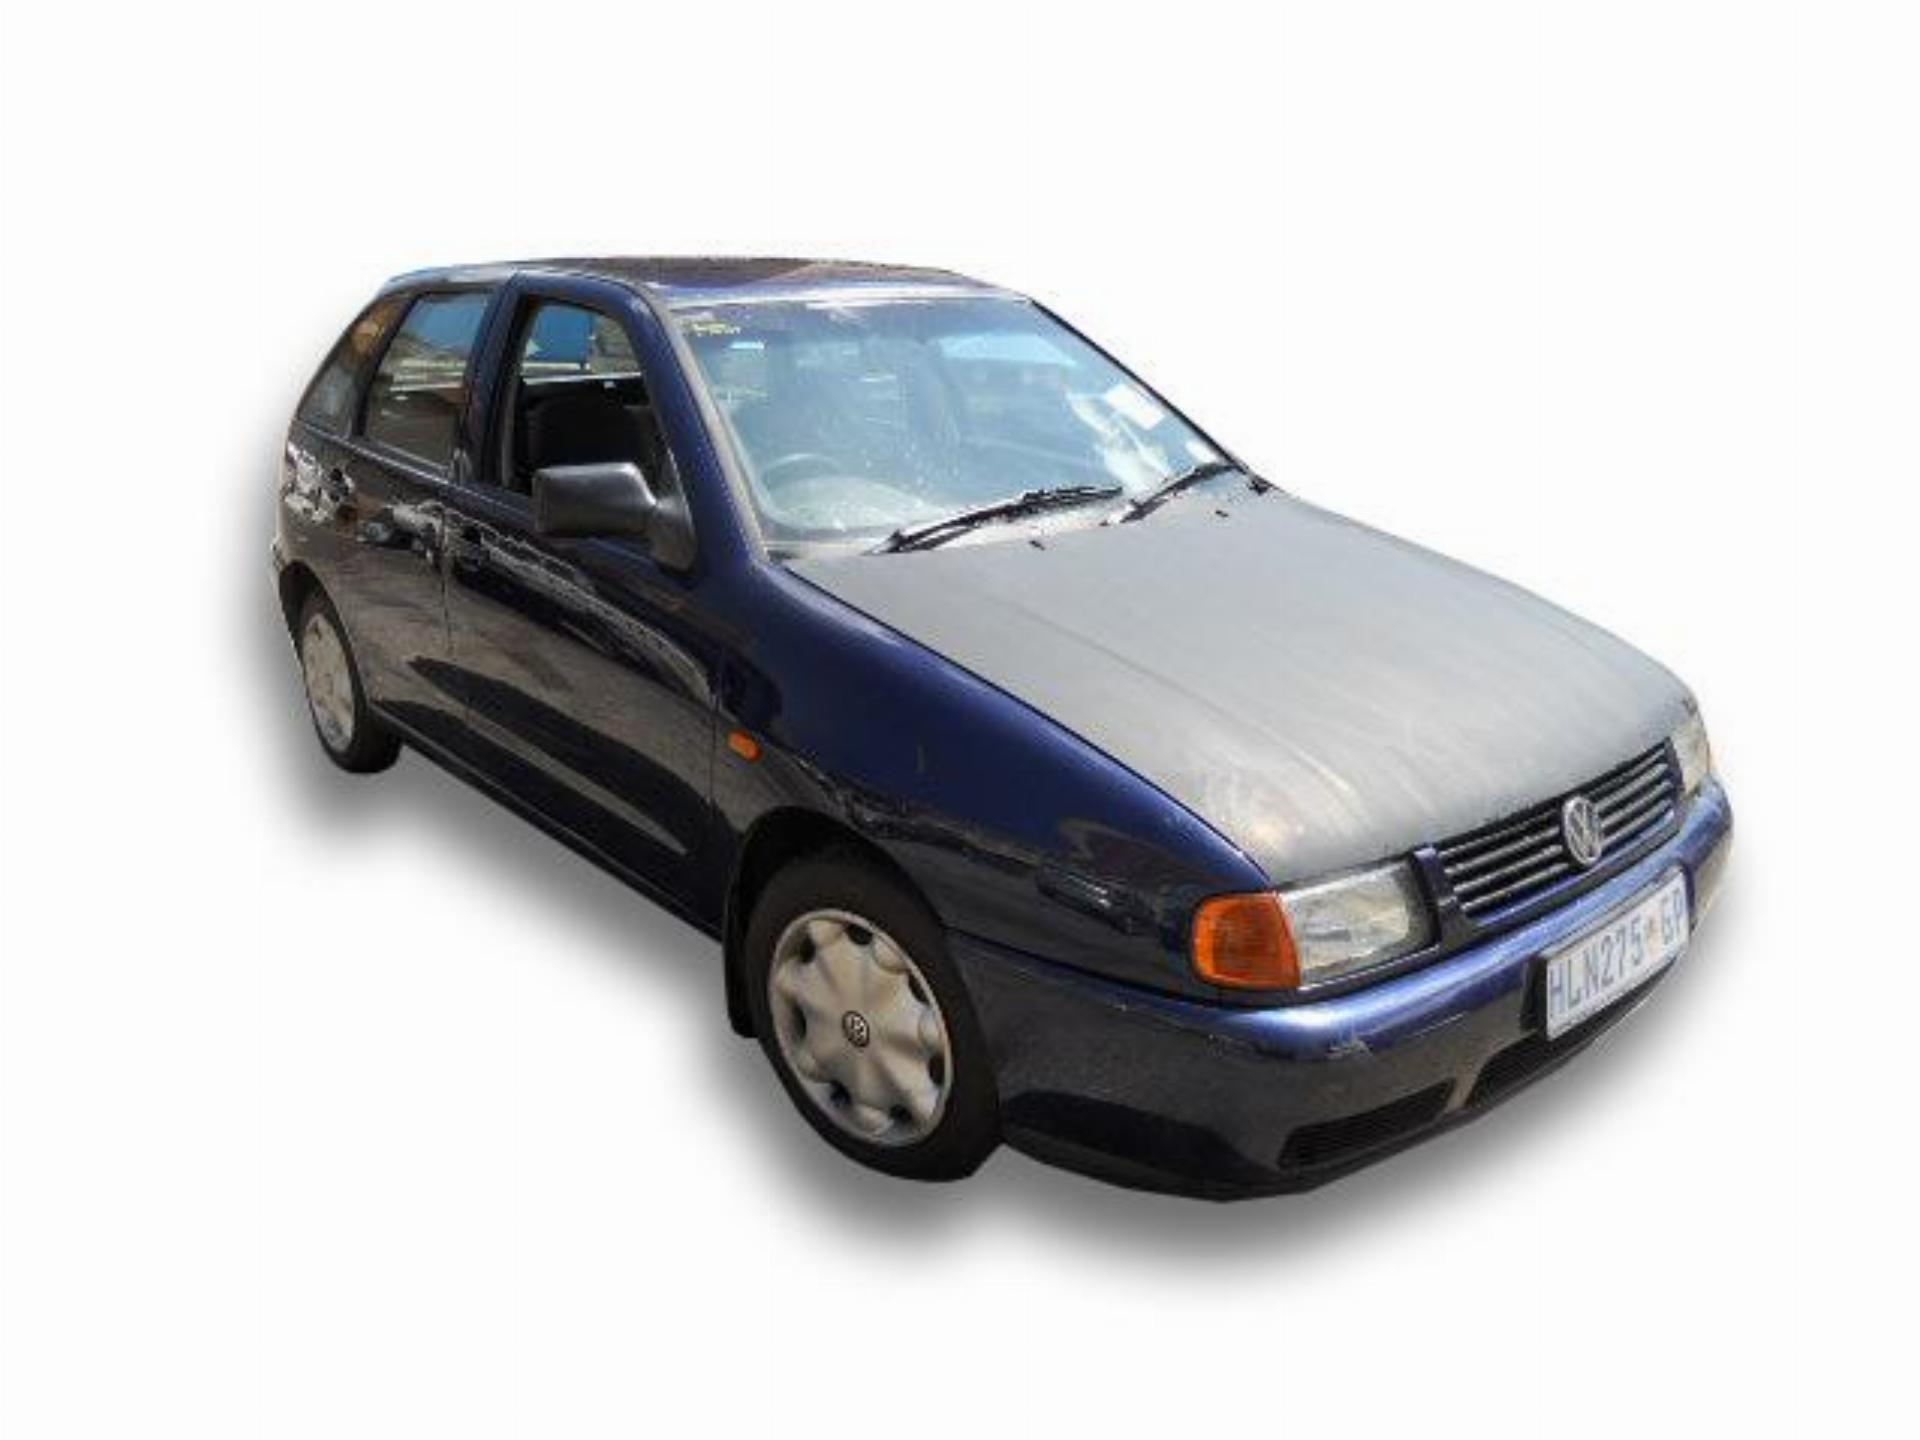 Volkswagen Polo Playa 1.6I A/C